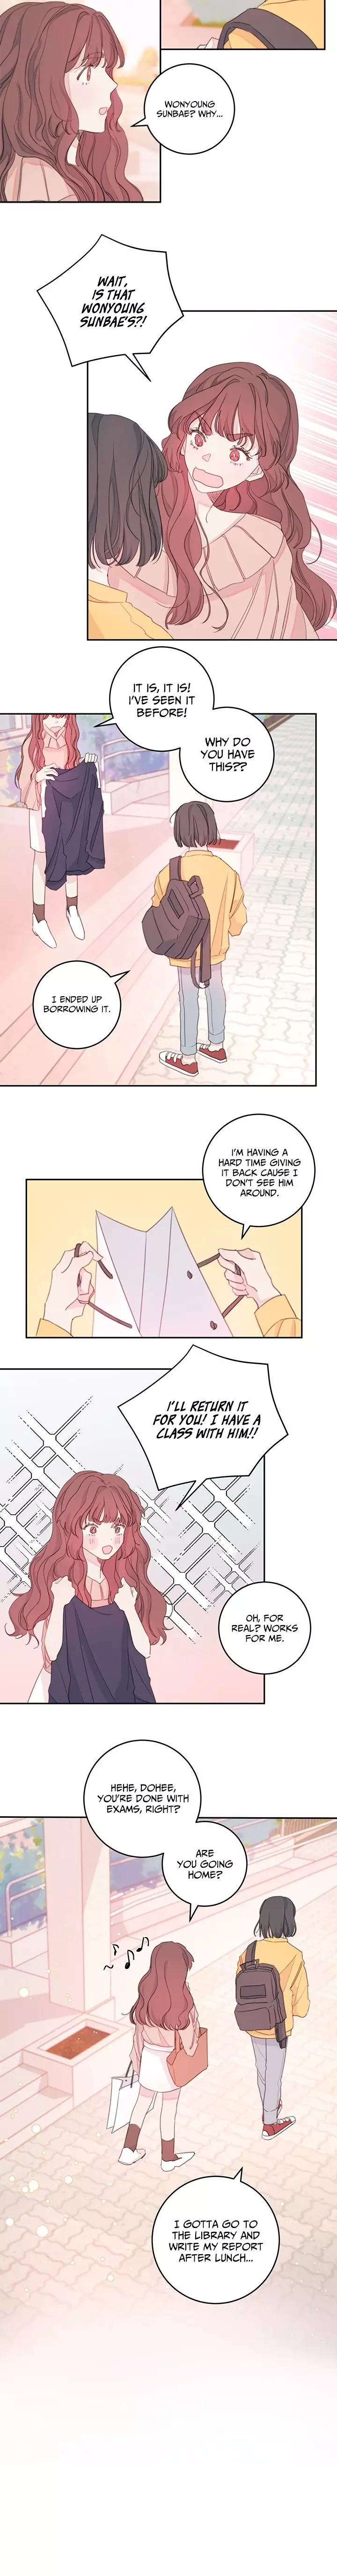 Today Living With You - 3 page 9